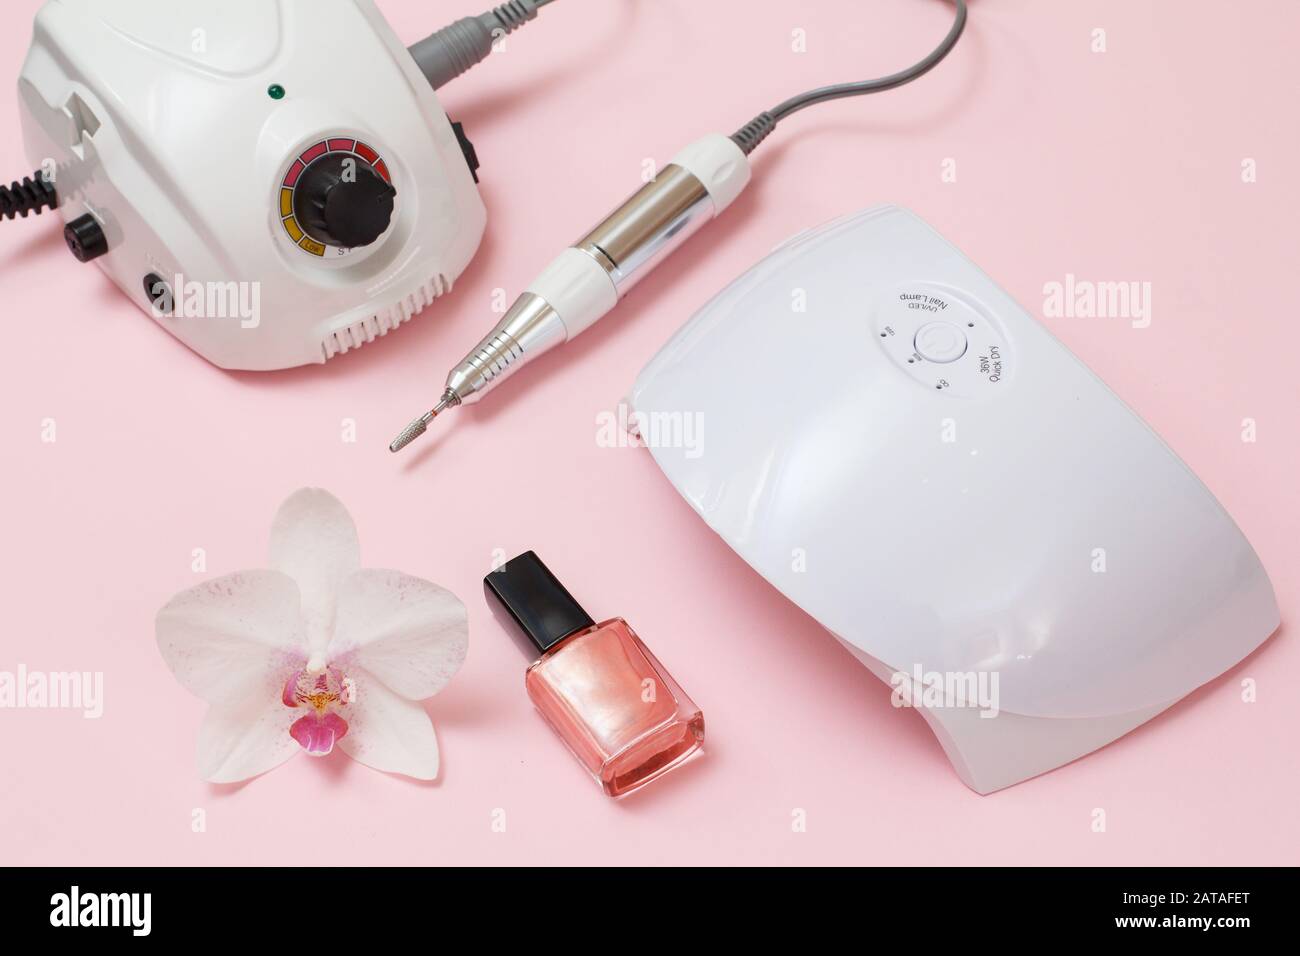 Milling cutter, led UV lamp, nail polishes and orchid flower on a pink background. A set of cosmetic tools for professional hardware manicure. Top vie Stock Photo